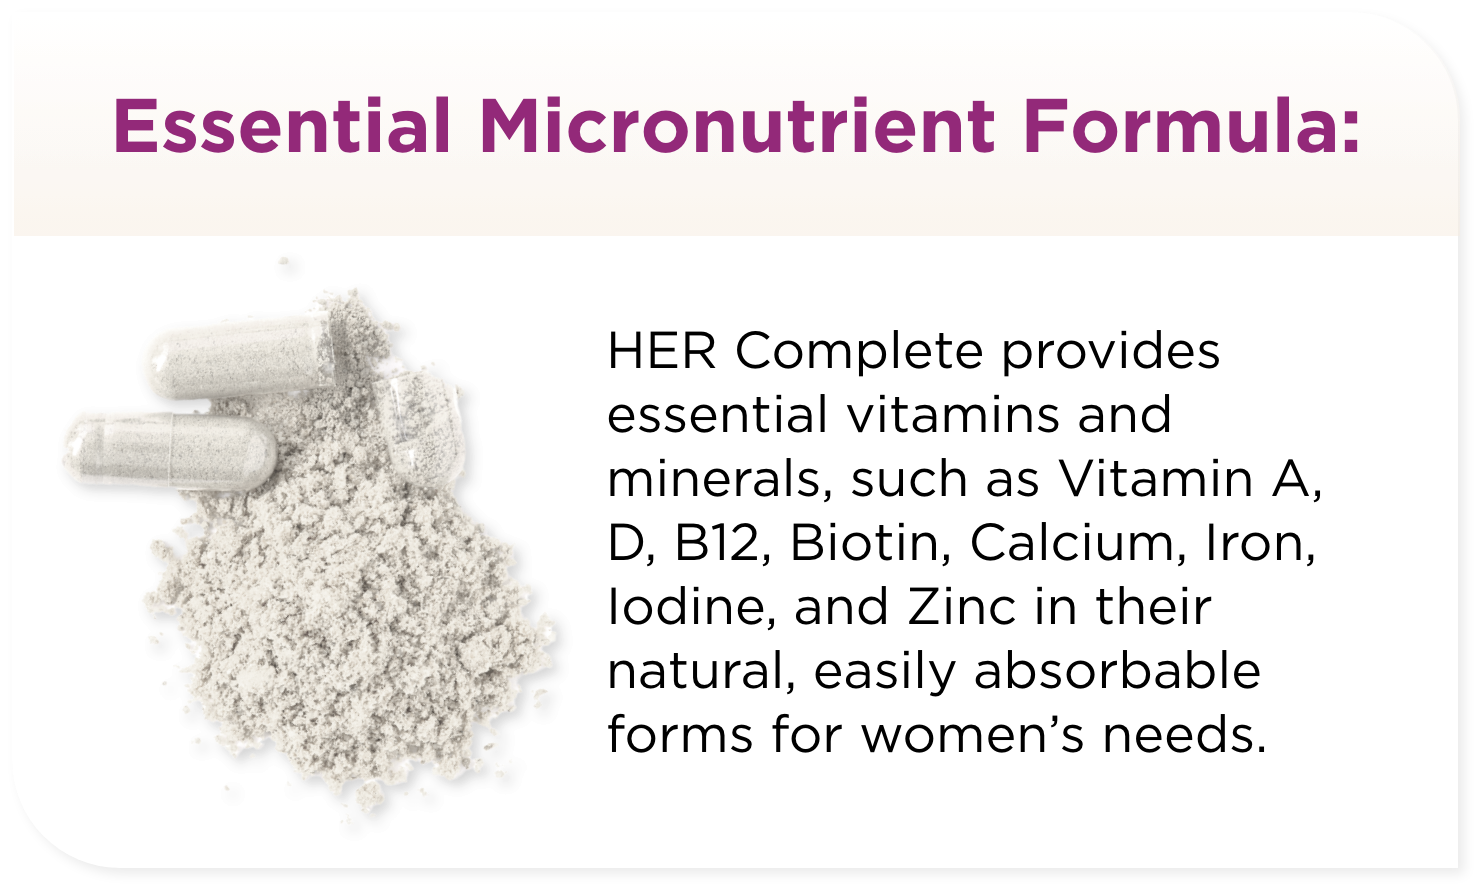 HER Complete provides essential vitamins and minerals, such as Vitamin A, D, B12, Biotin, Calcium, Iron, Iodine, and Zinc in their natural, easily absorbable forms for women’s needs.